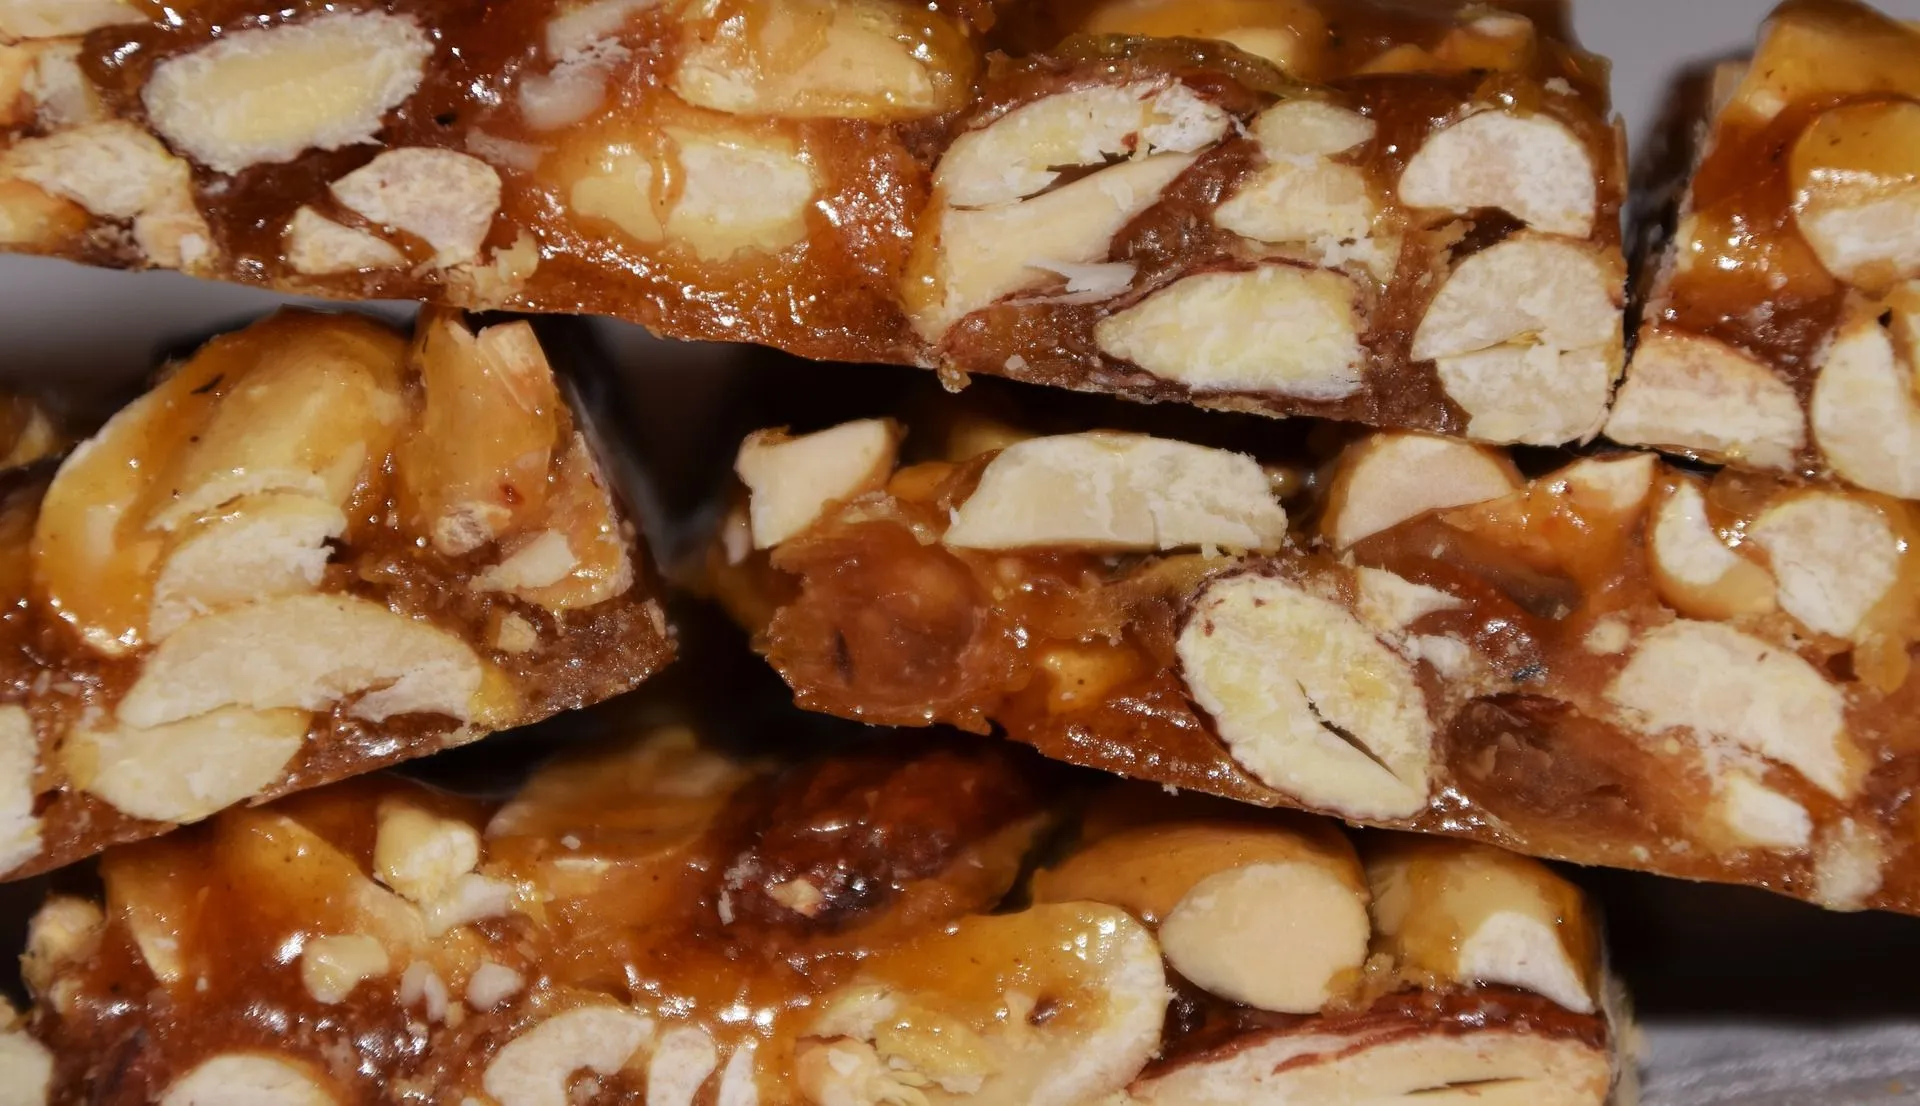 Peanut Brittle has a rich history associated with Tony Beaver.